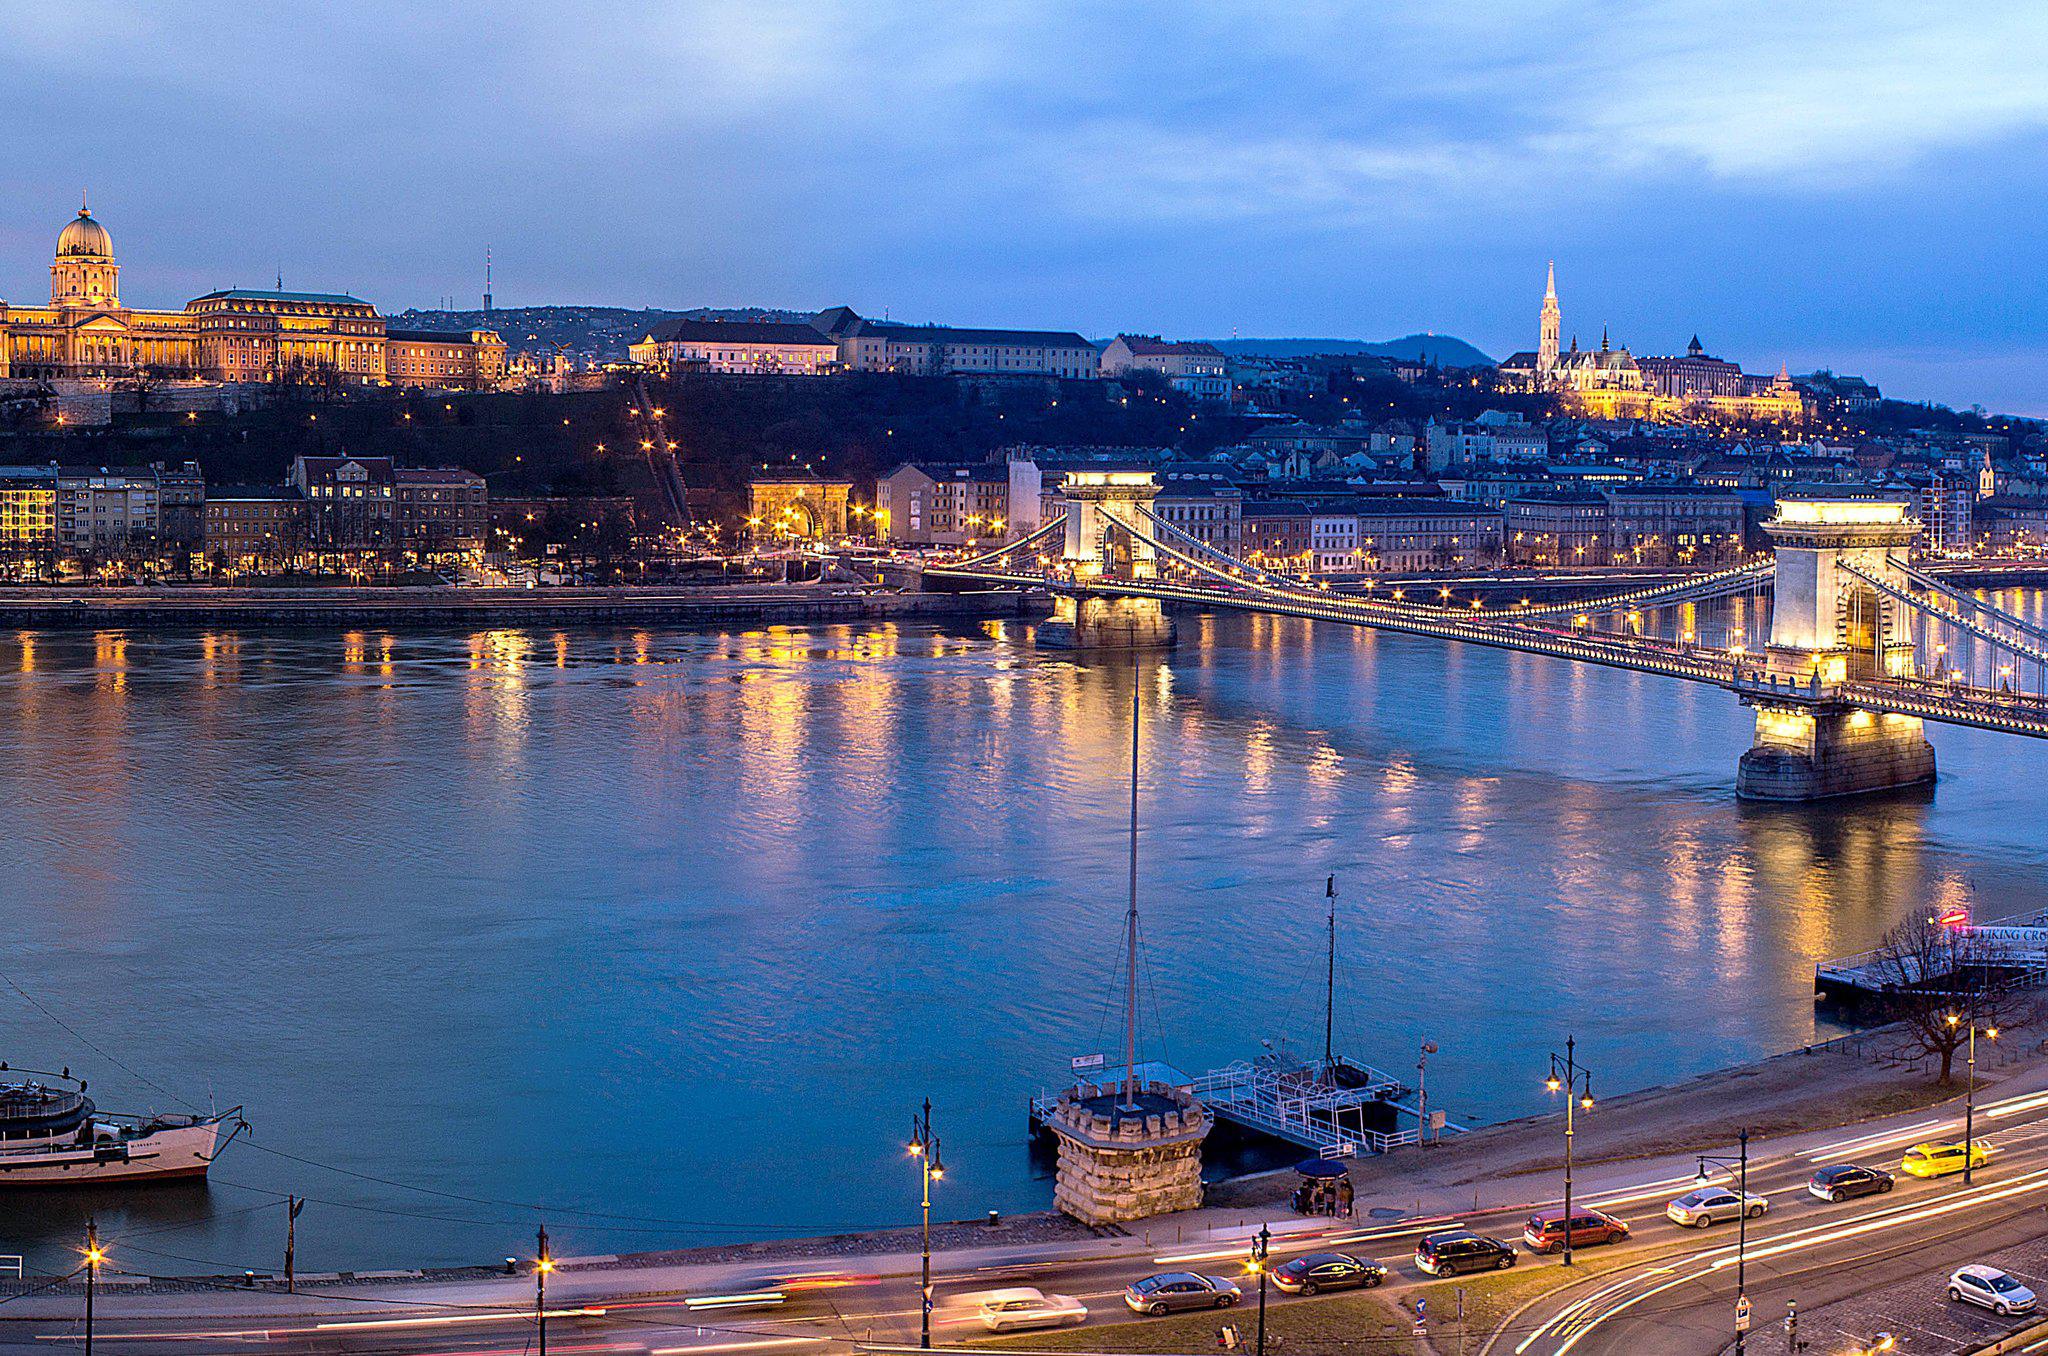 Images InterContinental Budapest, an IHG Hotel